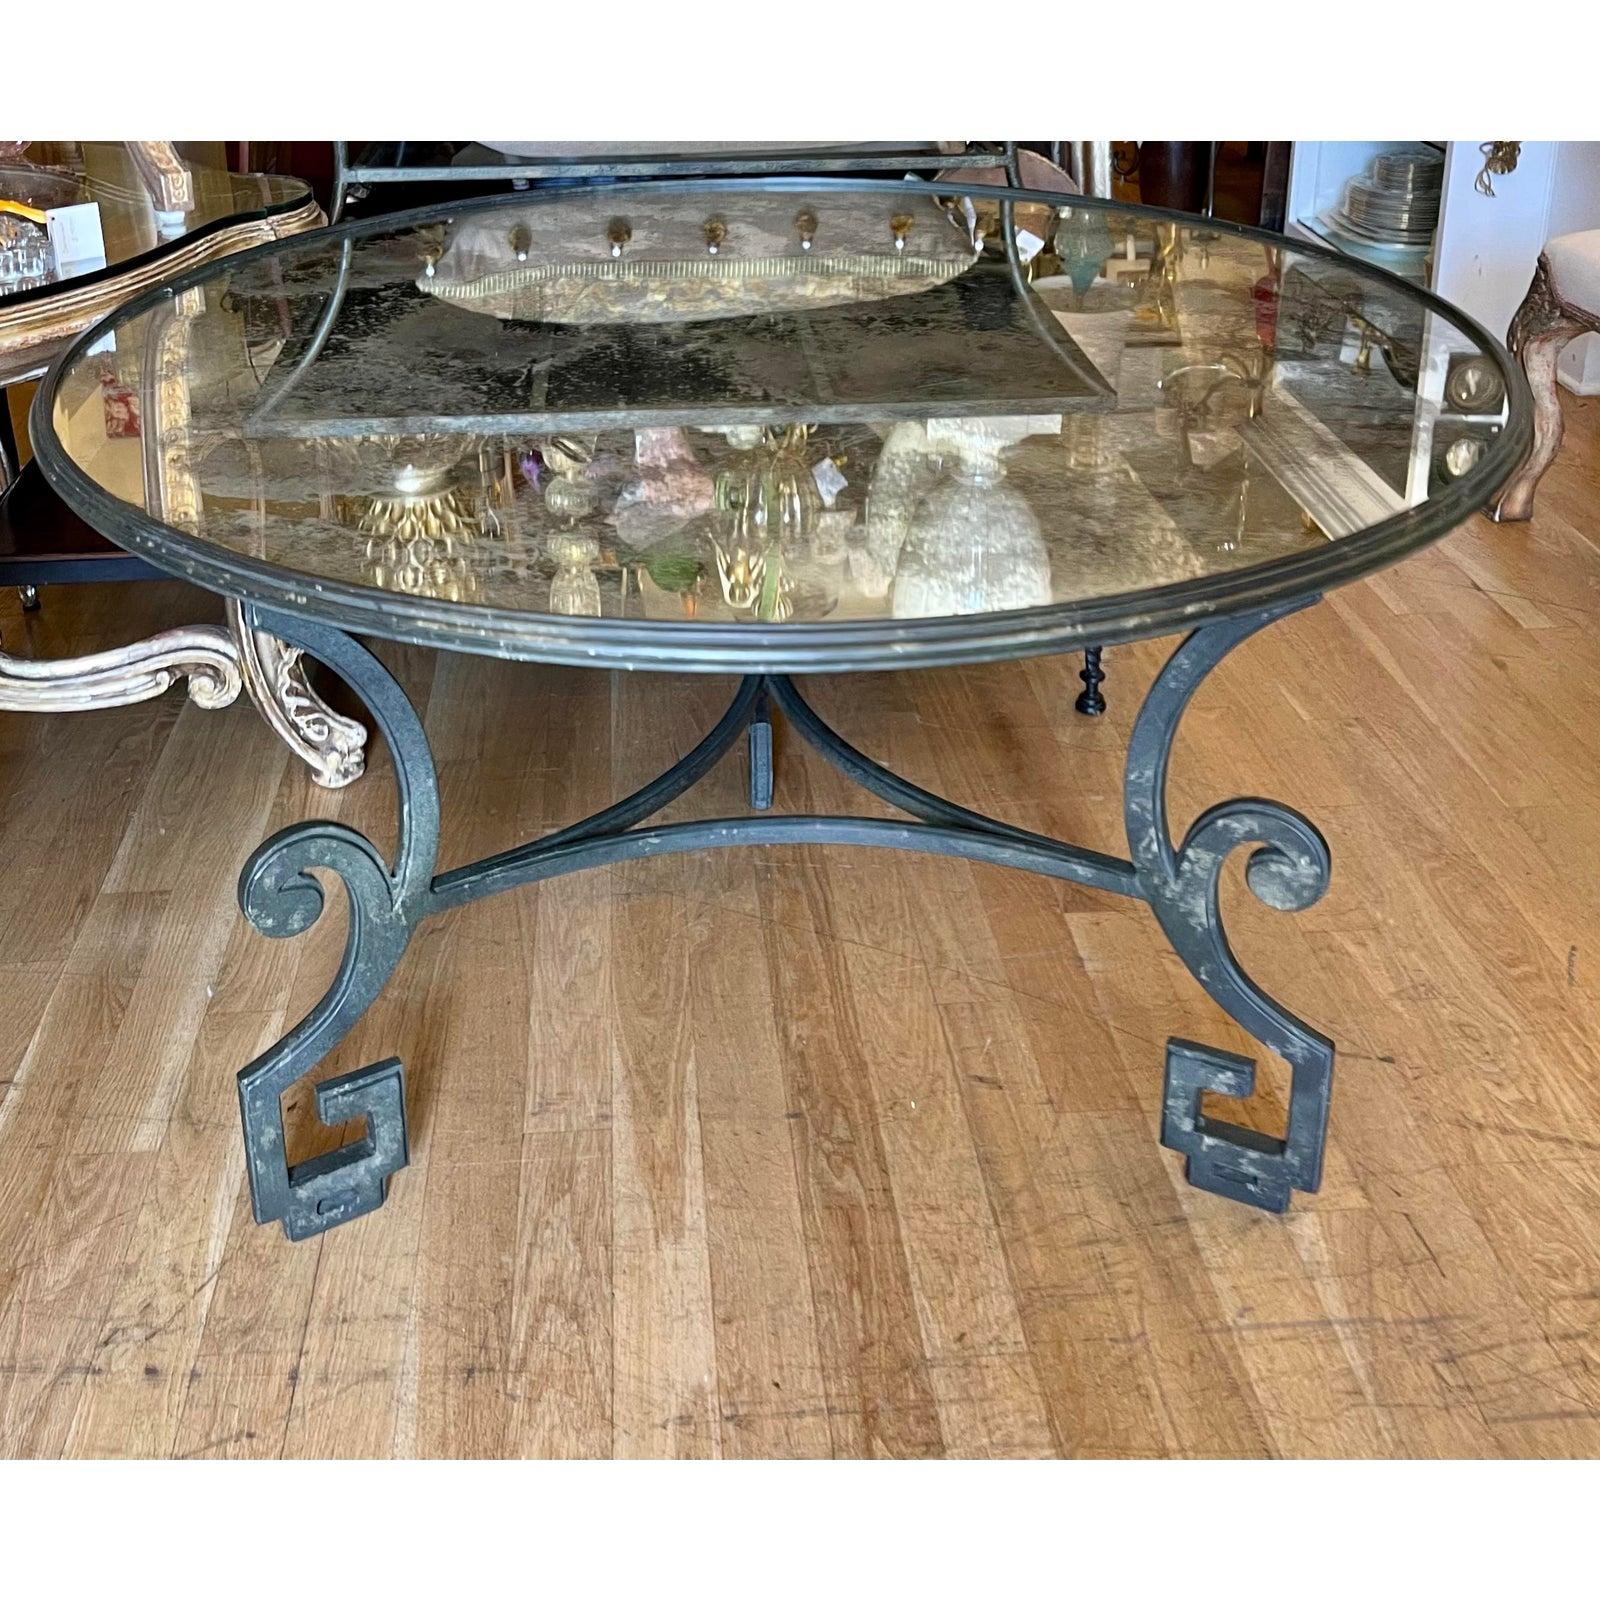 Formations Greek key antiqued mirror top wrought iron dining table.